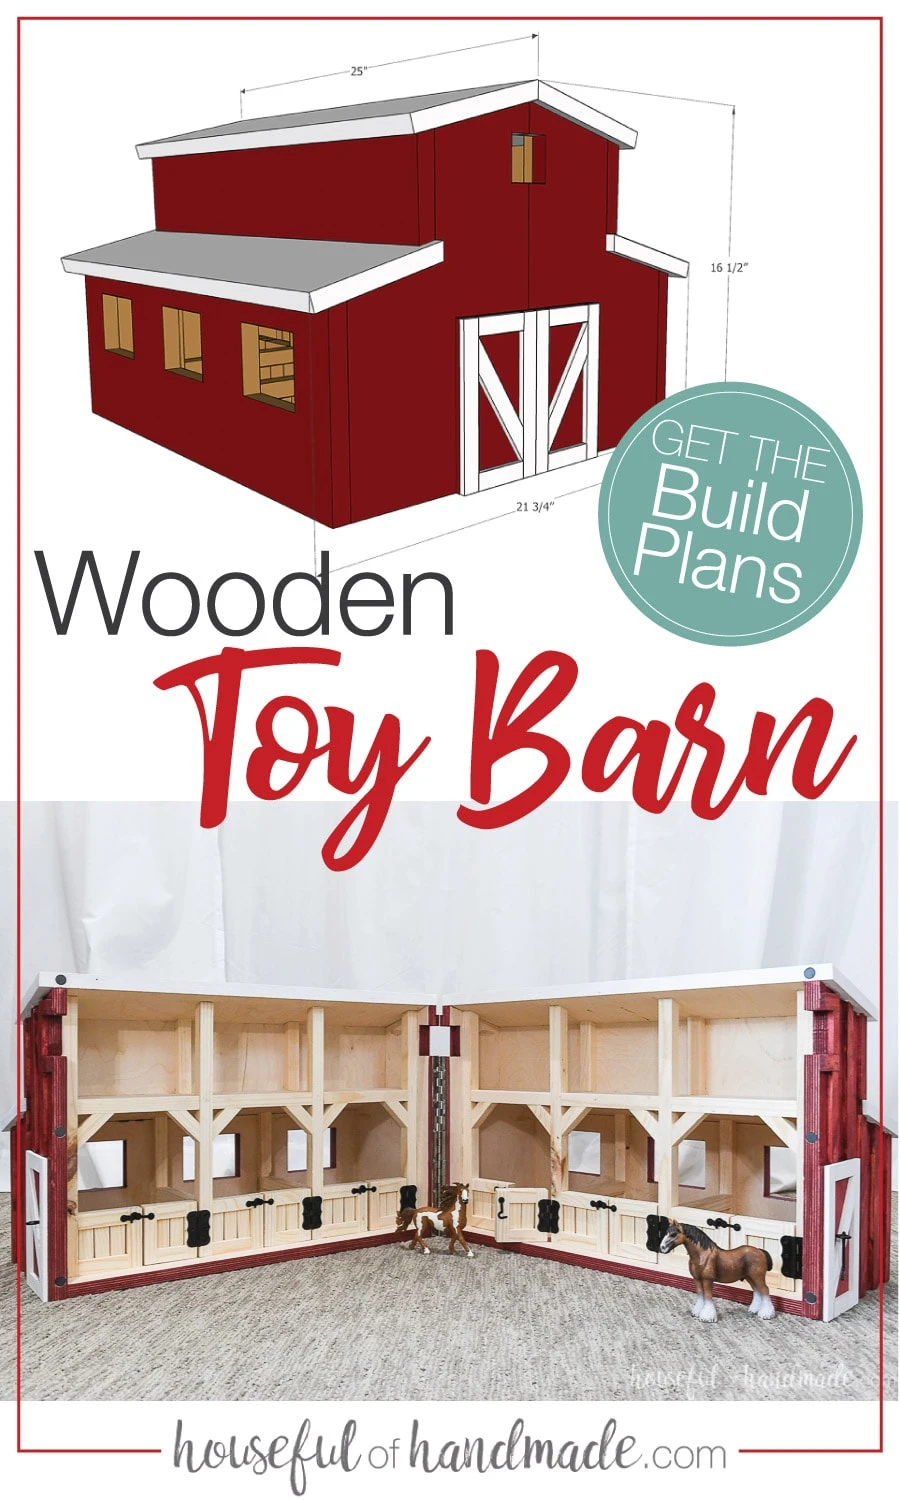 Sketchup drawing of the wooden toy barn plans and picture of the finished build opened up. 